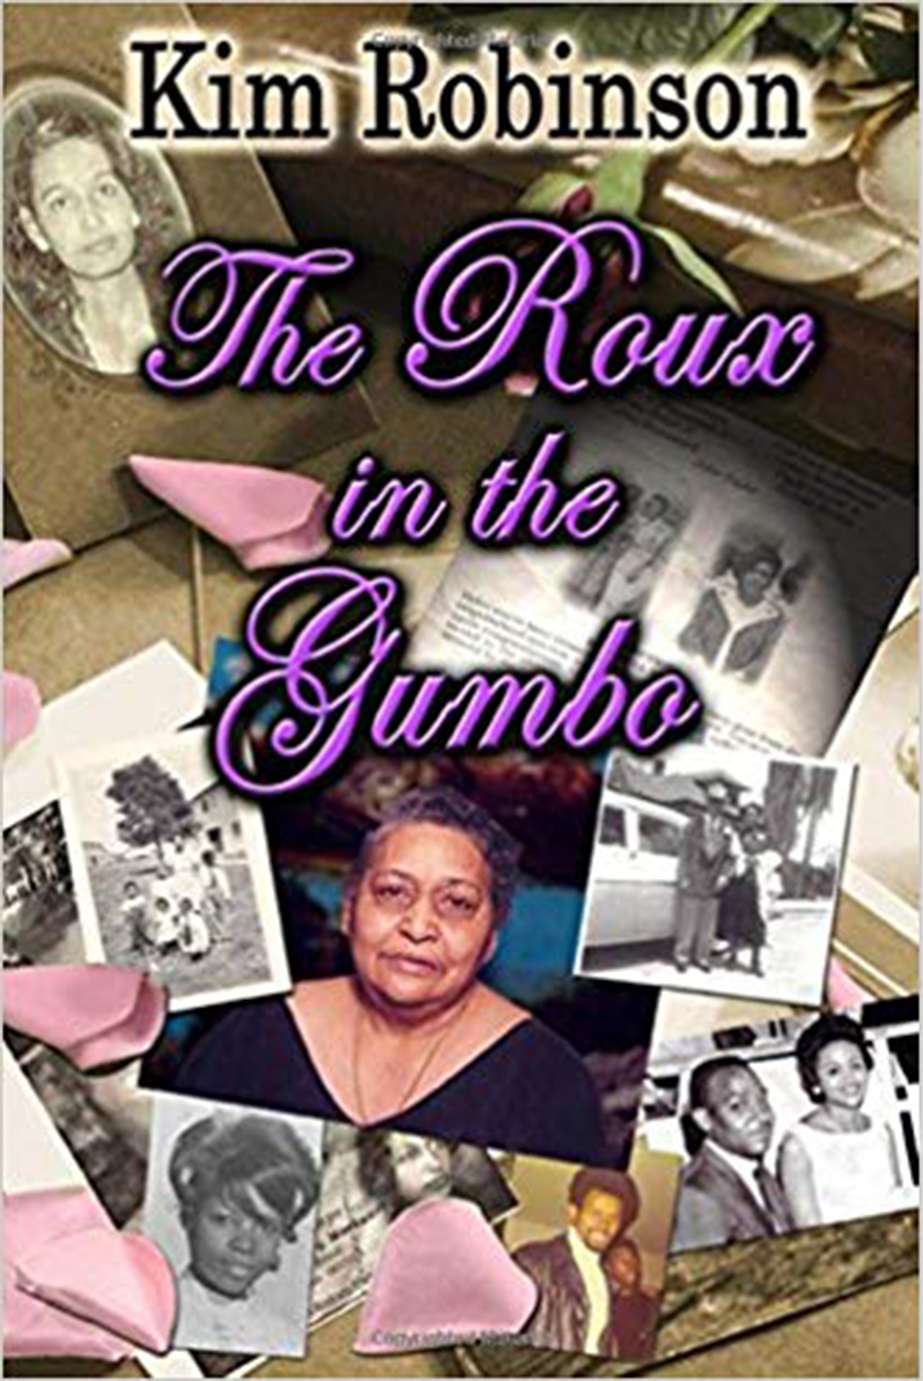 //kim-robinson.com/wp-content/uploads/2017/08/The-Roux-In-The-Gumbo-by-Kim-Robinson.jpg